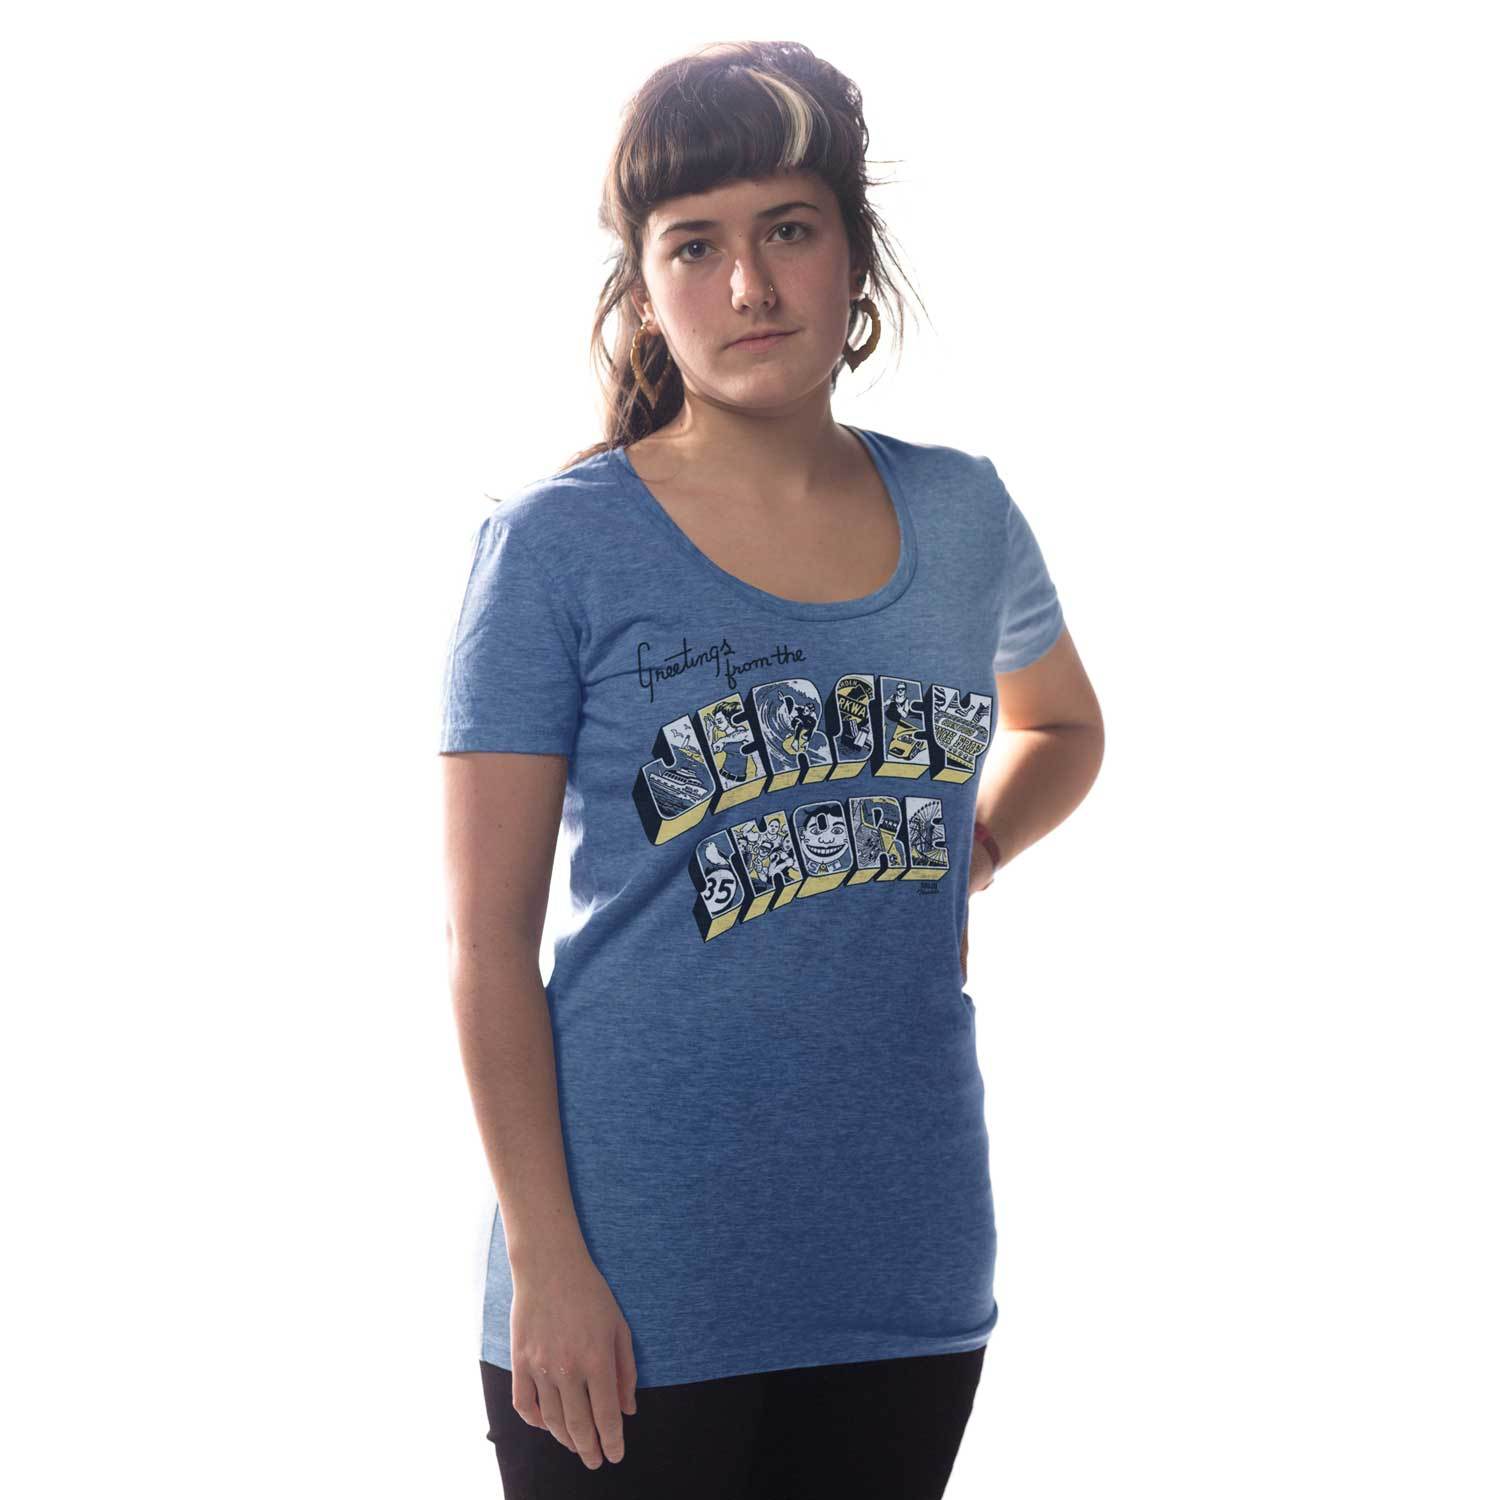 Women's Greetings from the Jersey Shore Vintage Inspired Scoopneck tee-shirt with funny, New Jersey graphic | Solid Threads